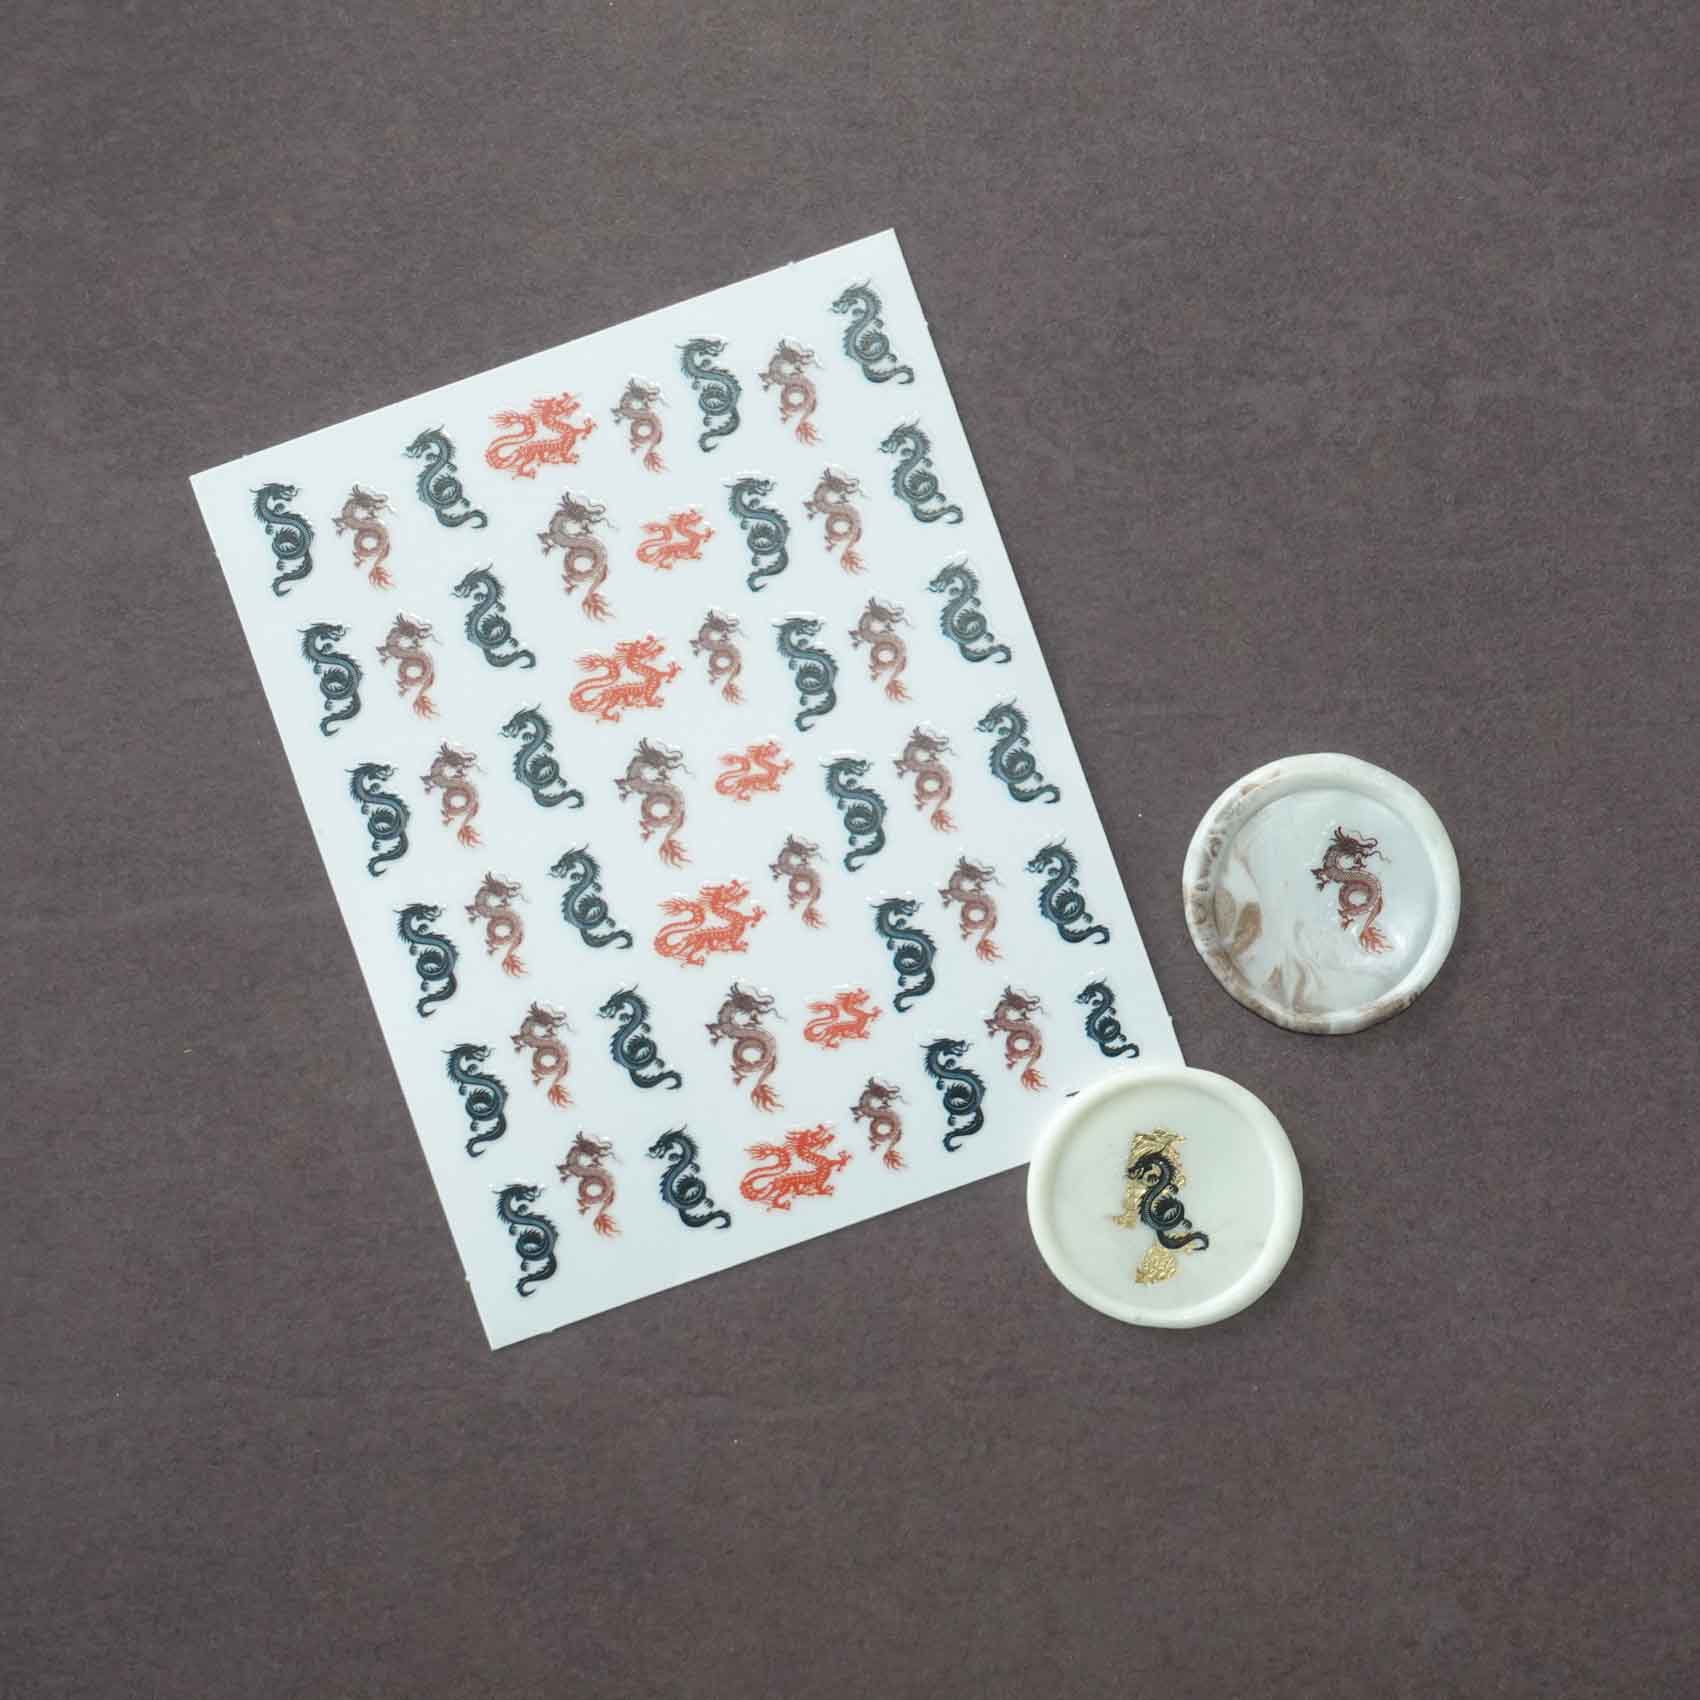 Dragons | Red Black Brown | Clear-Backed Decorative Stickers Sheet